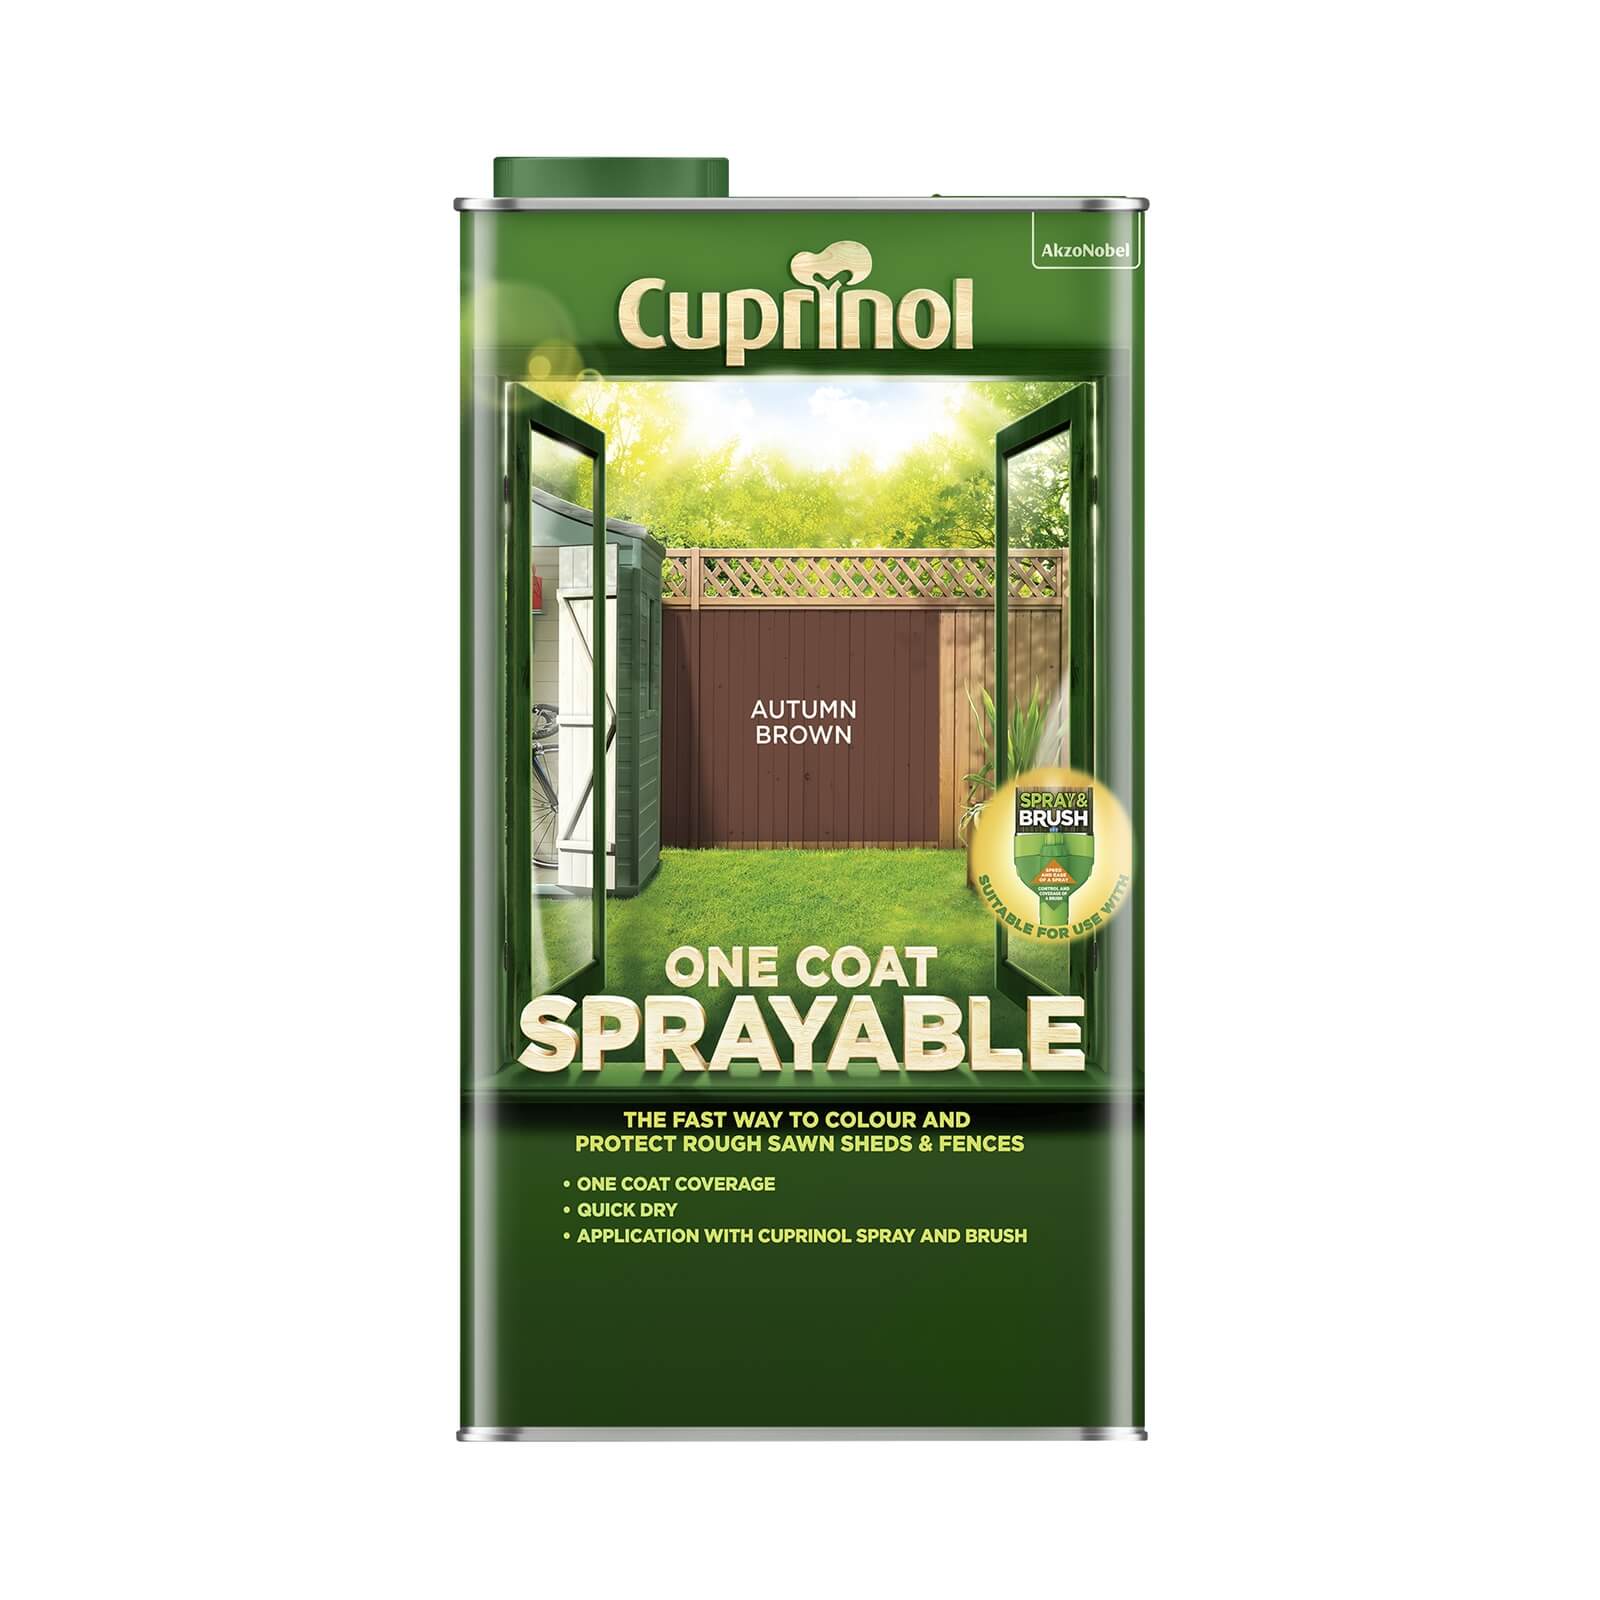 Photo of Cuprinol One Coat Sprayable Shed & Fence Paint - Autumn Brown - 5l